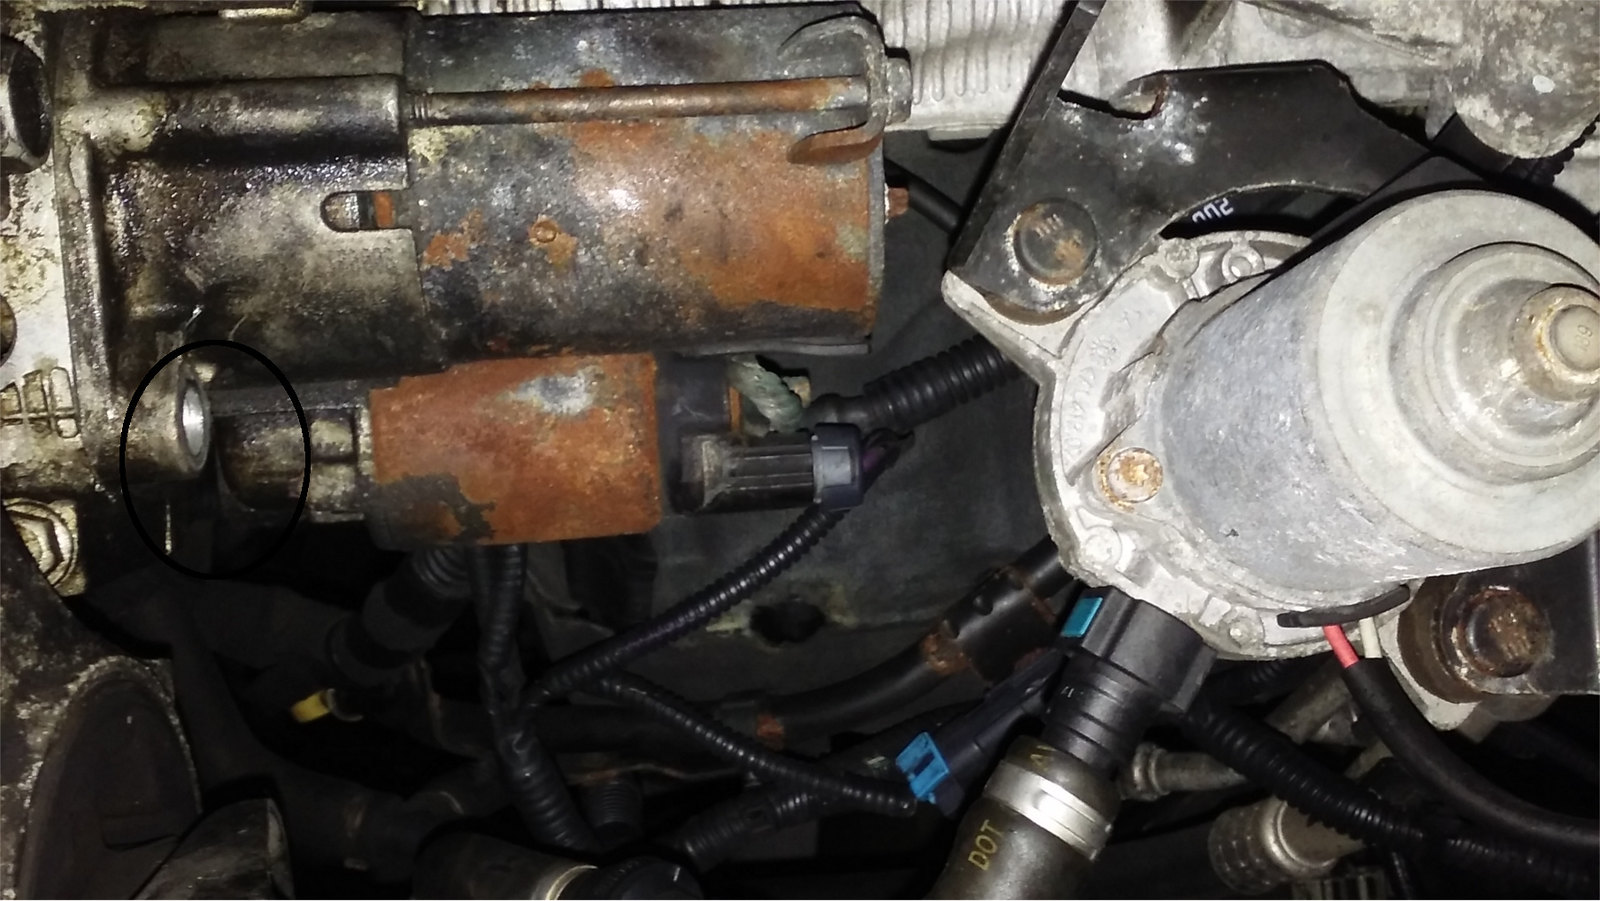 When does the starter motor need to be replaced?